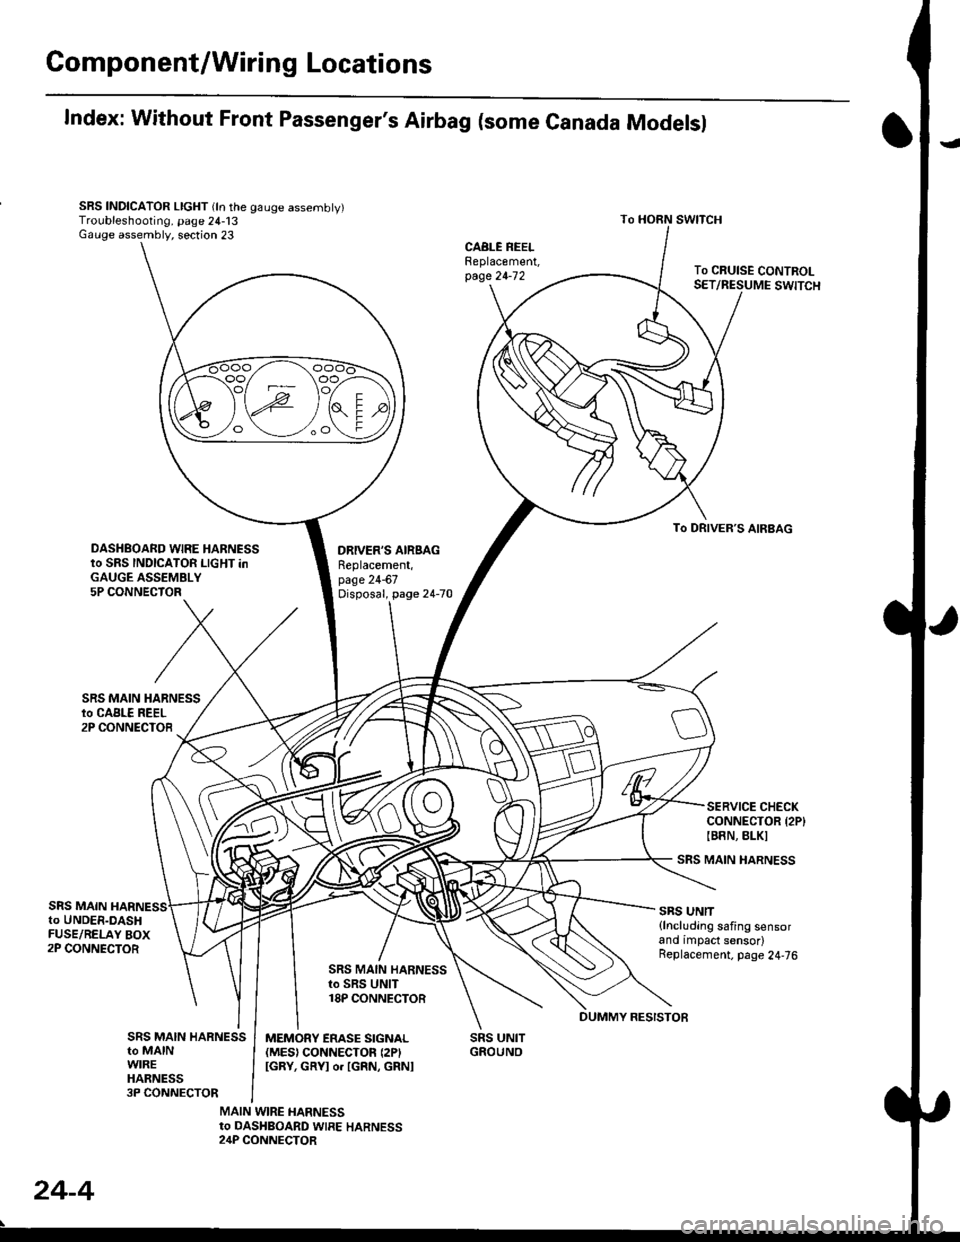 HONDA CIVIC 1996 6.G User Guide Gomponent/Wiring Locations
Index: Without Front Passengers Airbag (some Canada Modelsl
SRS INDICATOR LIGHT (ln the gauge assembly)Troubleshooting, page 24-13Gauge assembly, section 23
DRIVERS AIRSAG